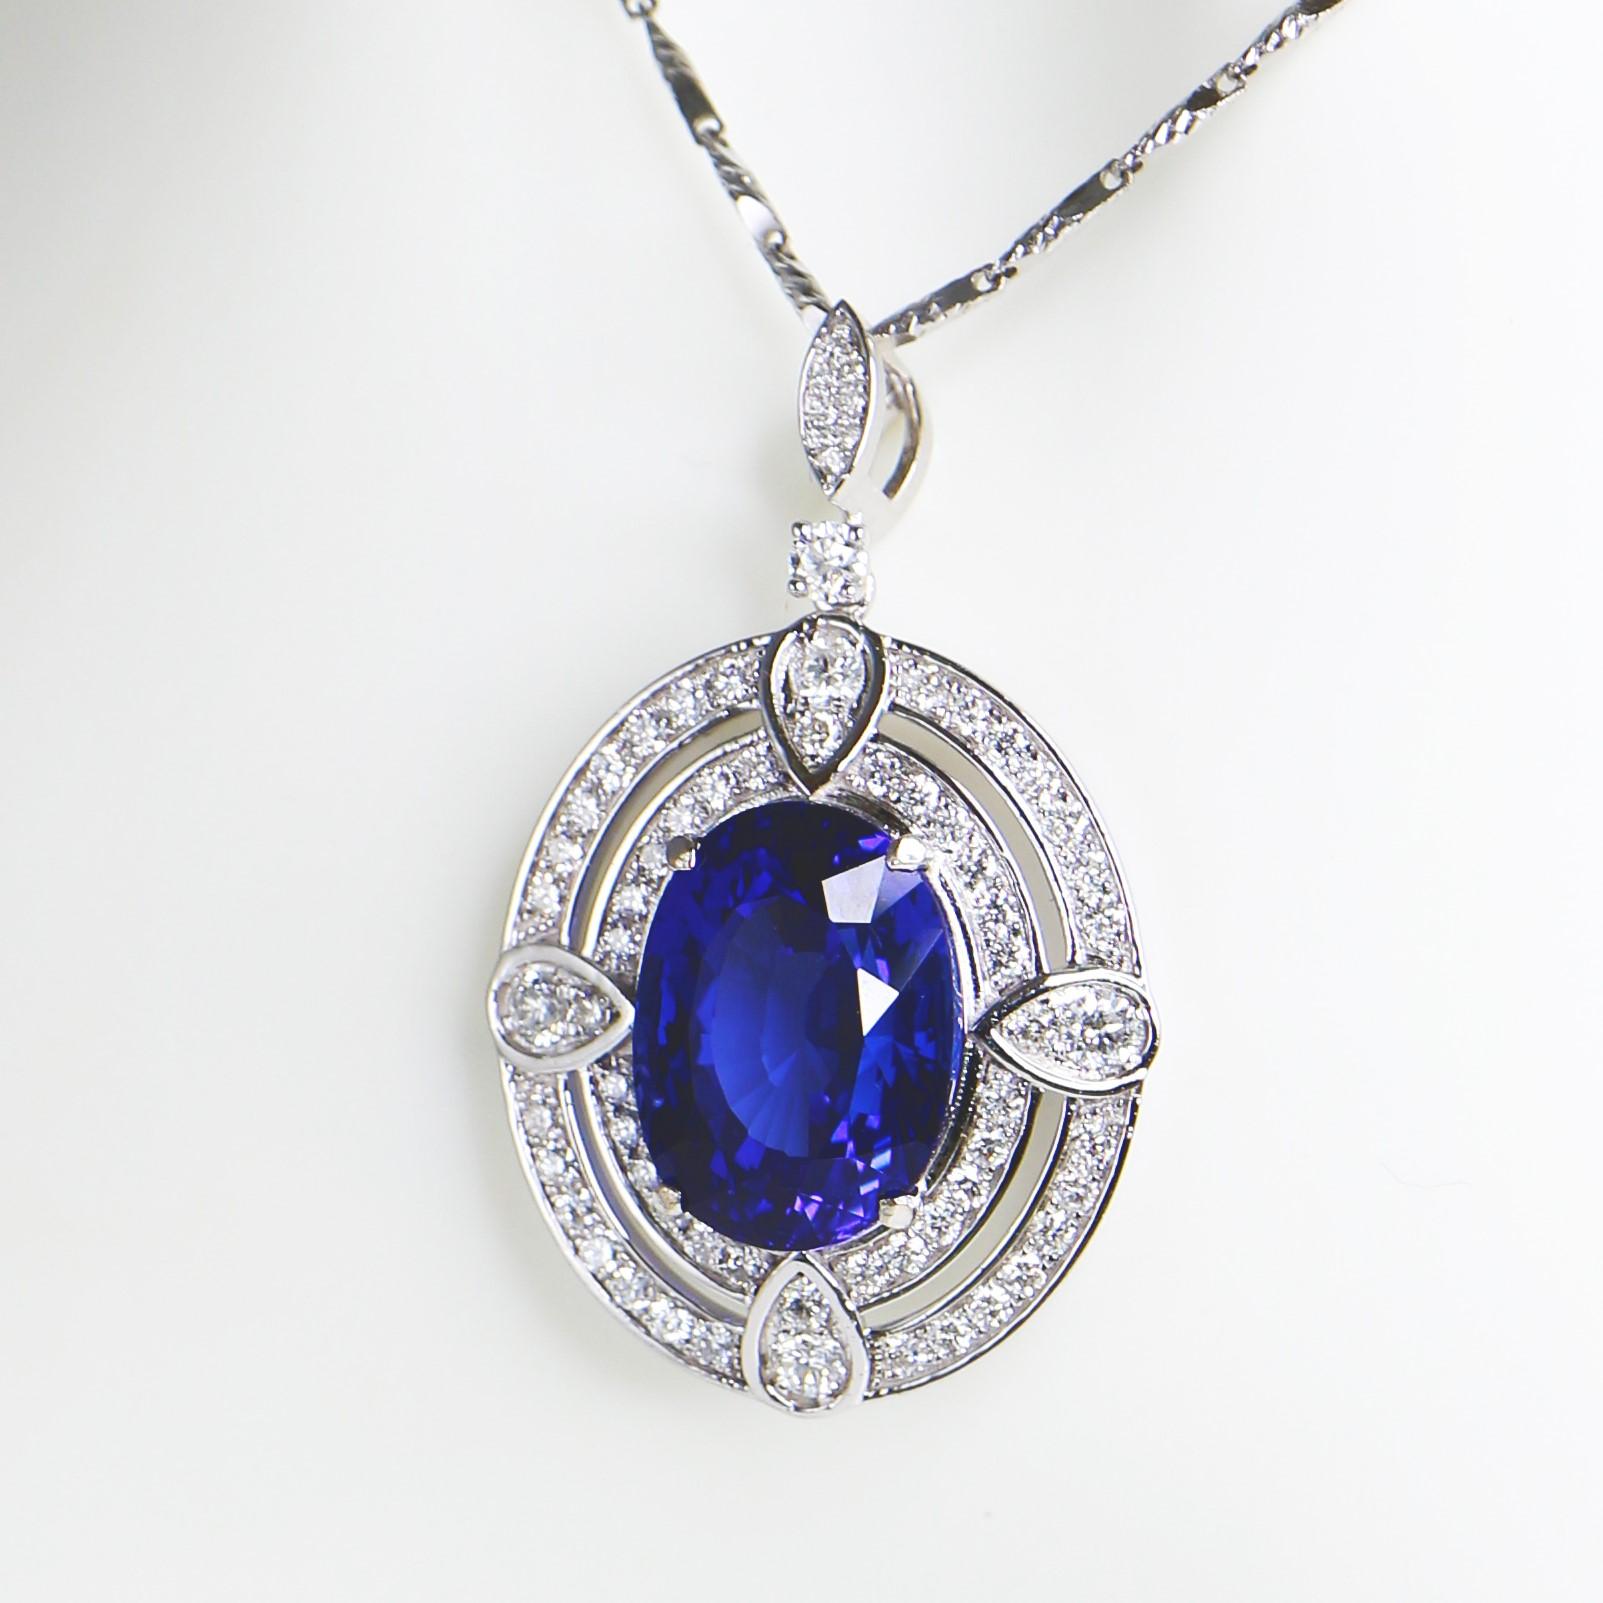 **One IGI 18K White Gold 10.19 Ct Tanzanite&Diamonds Pendant Necklace**

One IGI-Certified natural top-quality vivid blue Tanzanite as the center stone weighing 10.19 ct
surrounding by the FG VS accent diamonds weighing 1.07 ct not only to make the